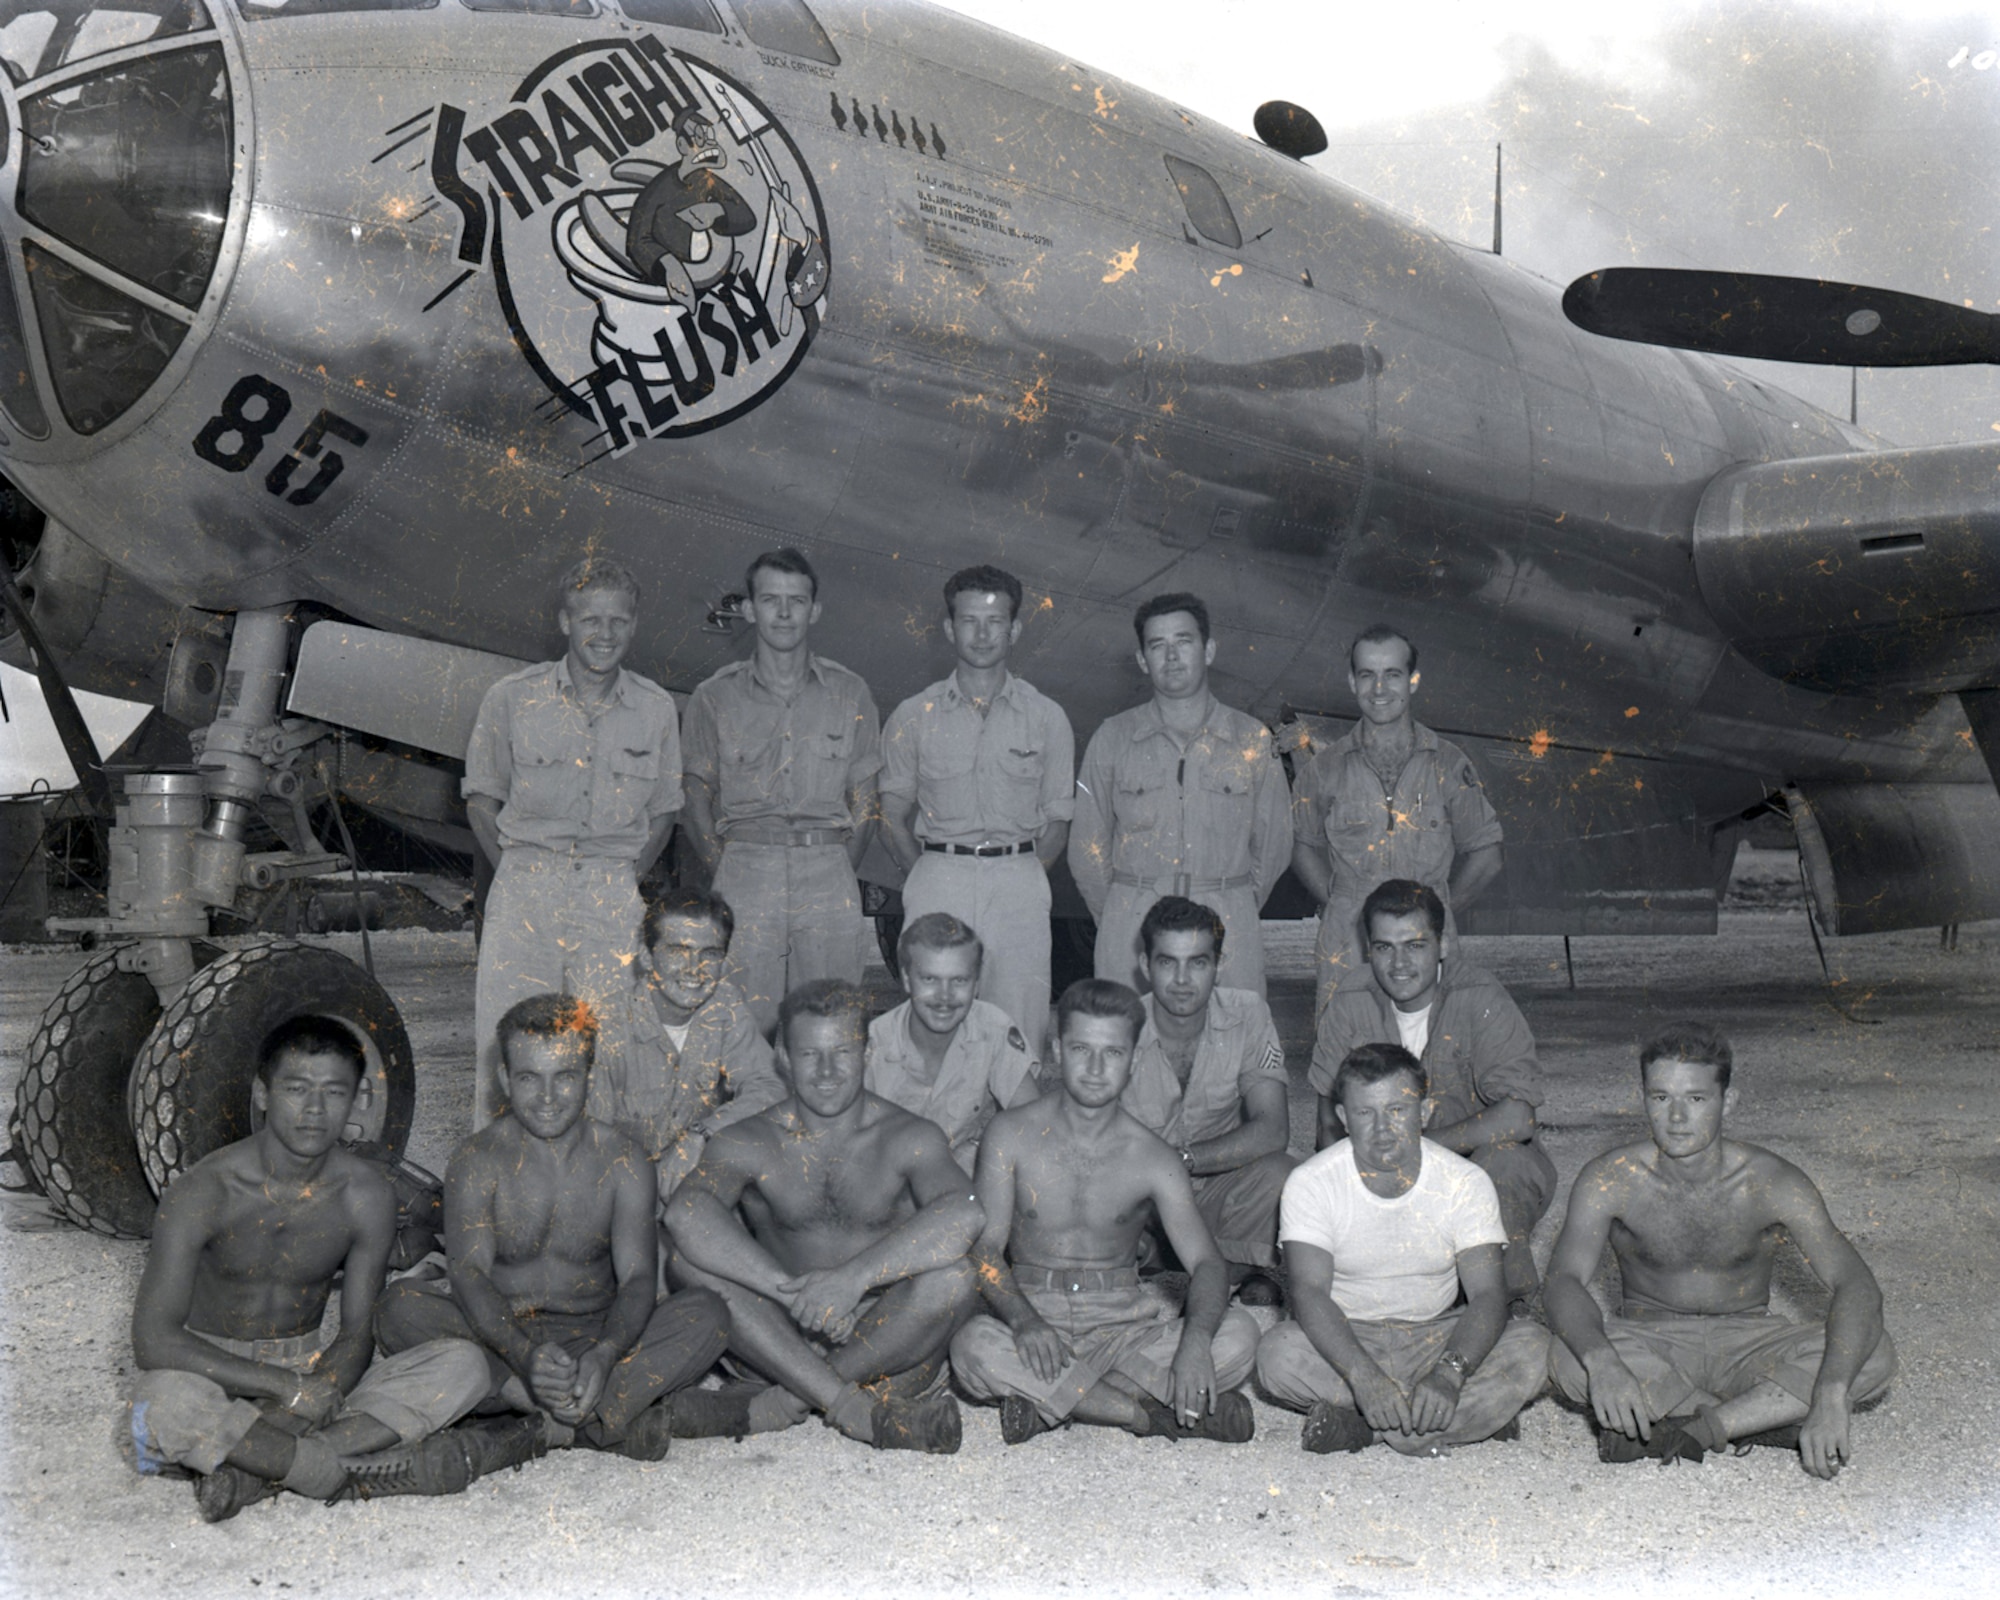 he B-29 Superfortress nicknamed “Straight Flush” and aircrew. Straight Flush and its regular crew flew the plane over Japan and radioed that the weather appeared sufficiently clear before the Enola Gay dropped the atomic bomb on Hiroshima Aug. 6, 1945. Pictured: (Top row, left to right) 2nd Lt. Ira J. Weatherly, 2nd Lt. Franklin Wey, Maj. Claude R. Eatherly, Capt. Francis D. Thornhill, and 2nd Lt Thoms Grennan. (Middle row, left to right) Sgt. Jack Bivans, Sgt. Gillon T. Niceley, S/Sgt. Pasquale Baldasaro, Sgt. Albert Barsumian. Bottom row, left to right) Cpl. Yive J.H. Ping, Pfc. Harold E. Kinsley, Pfc. Chester S. Chudy, Sgt. Howard A. Thompson, T/Sgt. Donald D. Beaudette, and Cpl. William E. Smith. (U.S. Air Force photo)